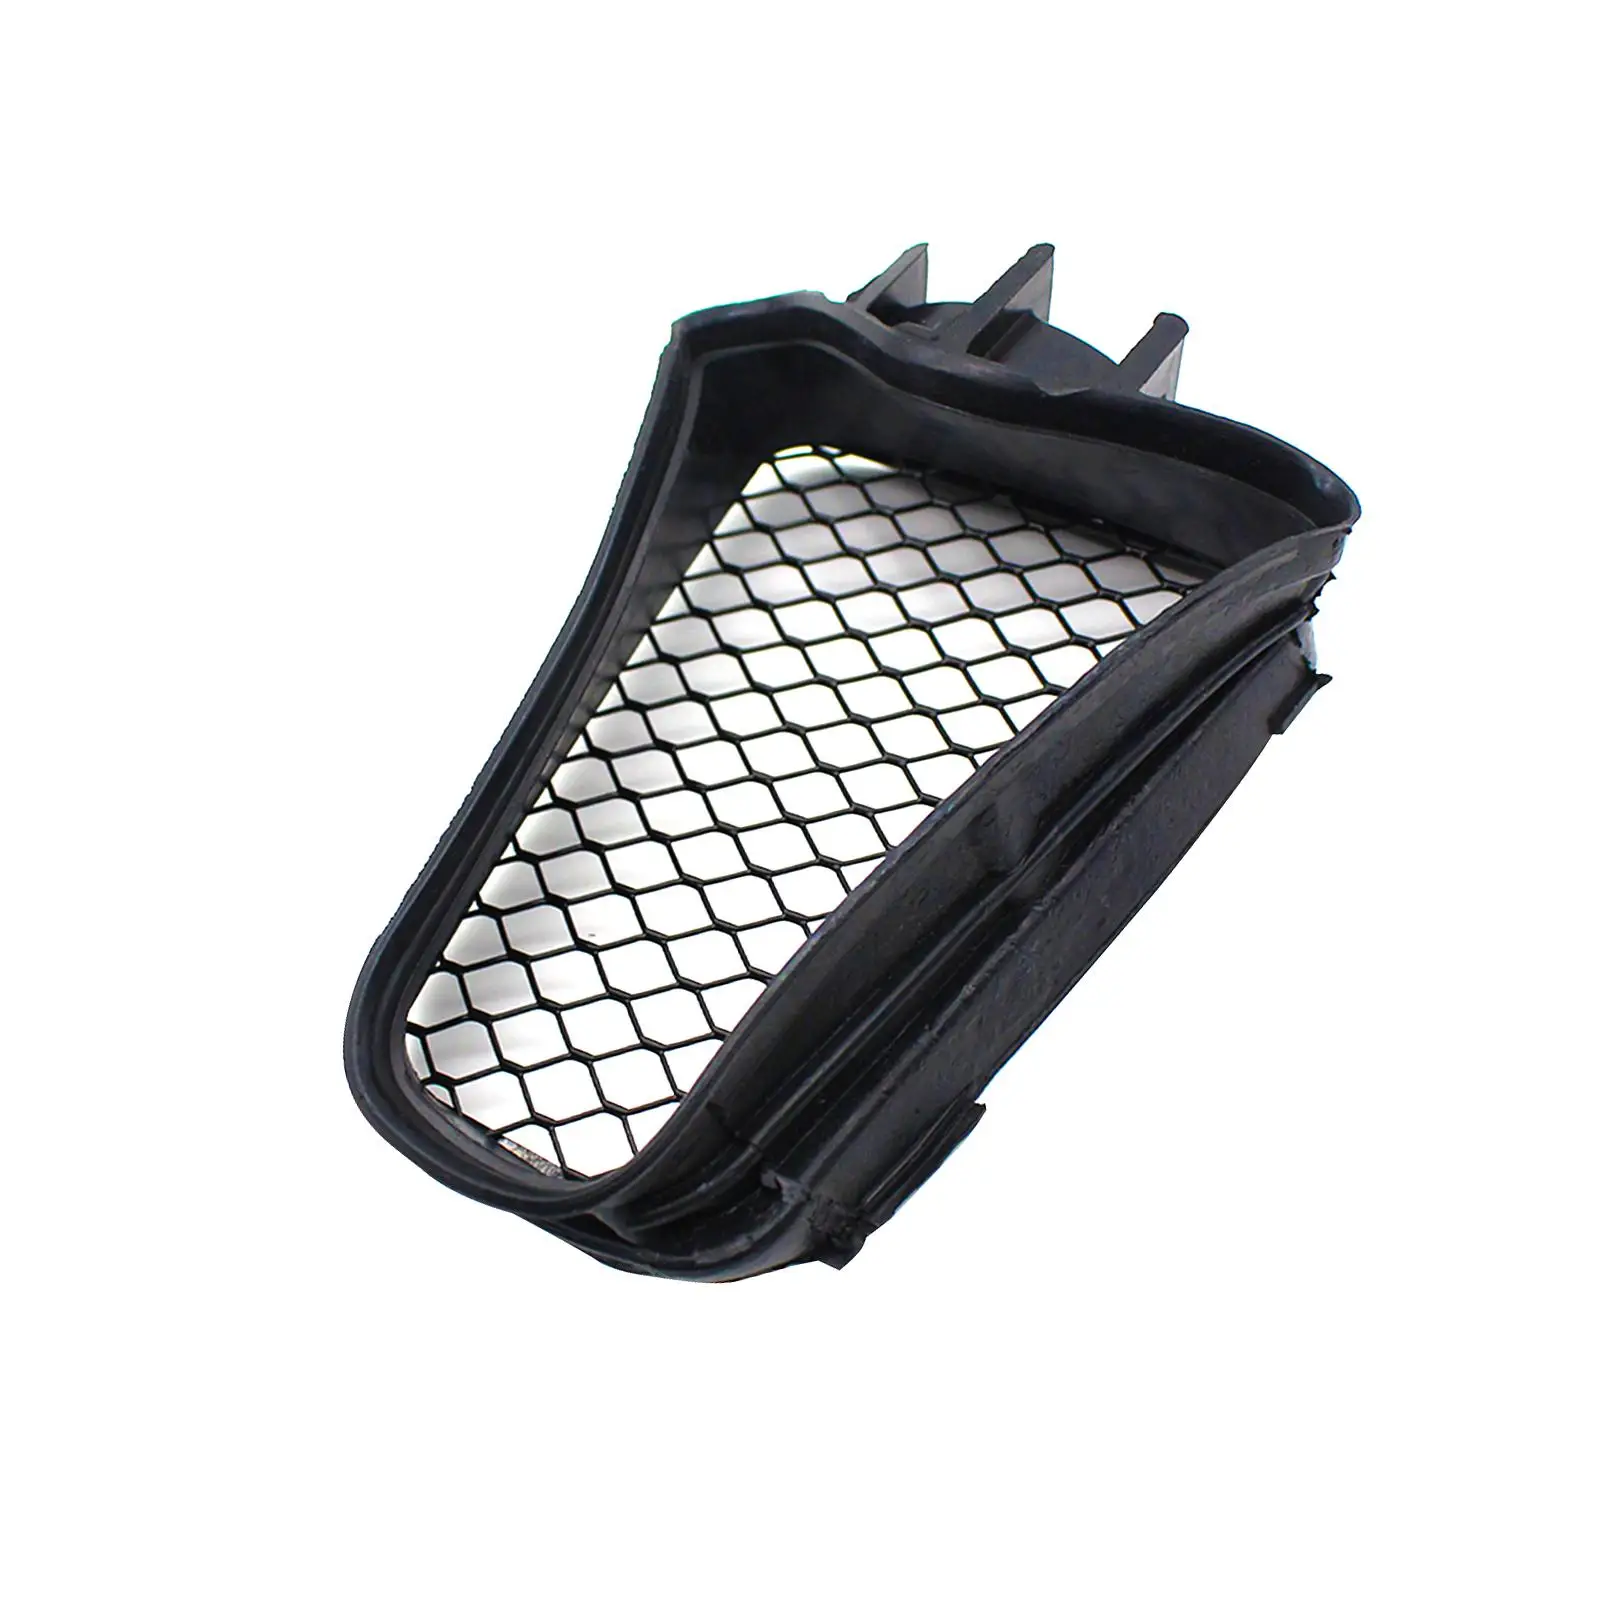 Air Intake Duct Net Cover Replacement Black for CBR600Rr 2007-2012